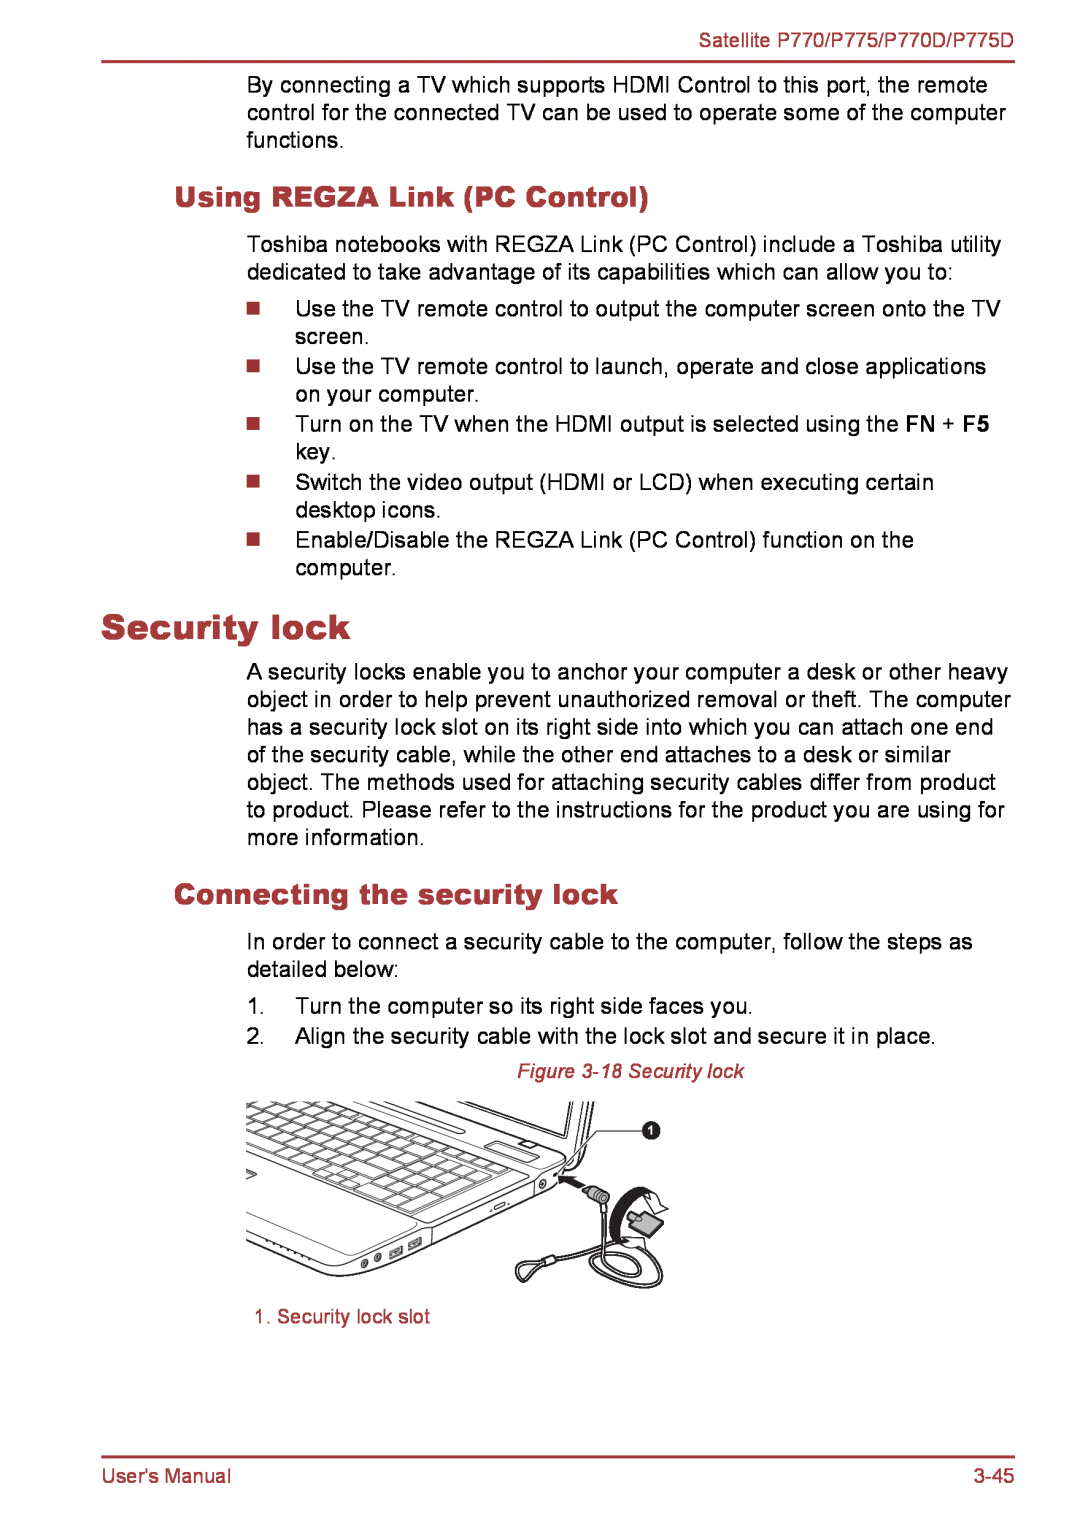 Toshiba P770 user manual Security lock, Using REGZA Link PC Control, Connecting the security lock 